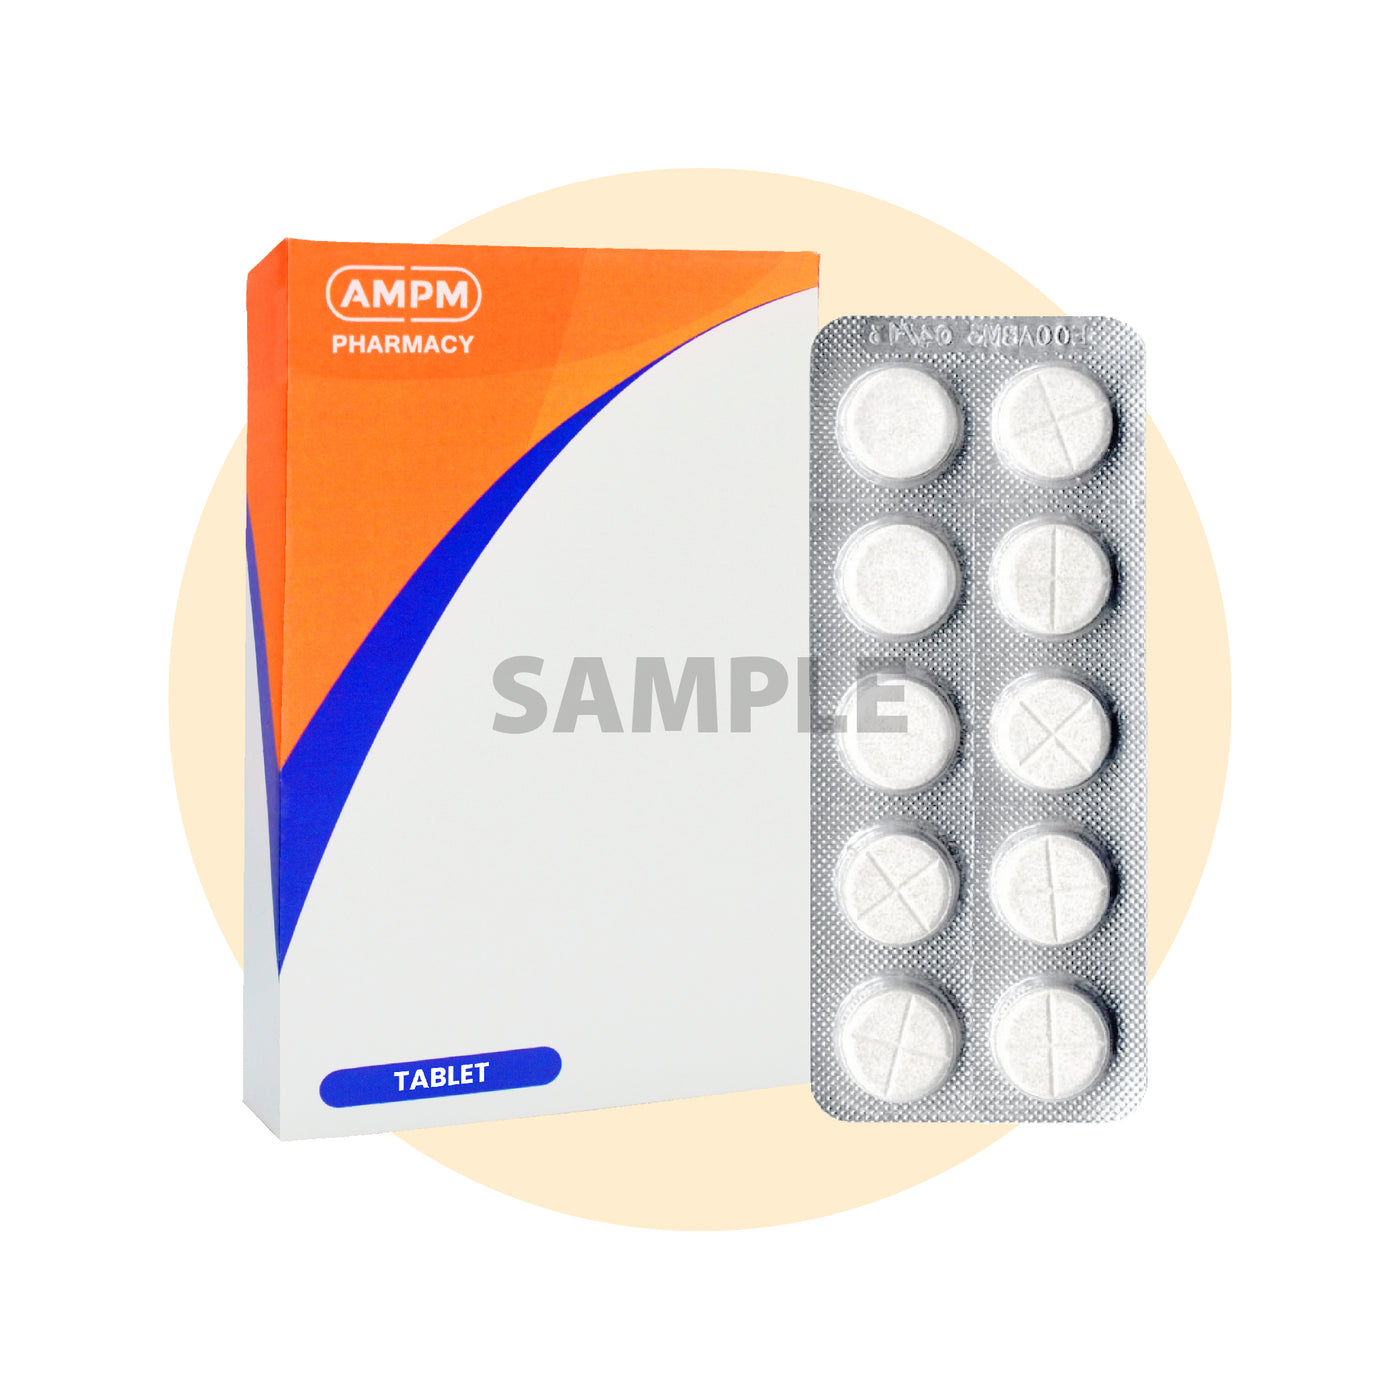 COVINACE 8mg TABLET 10's x 3